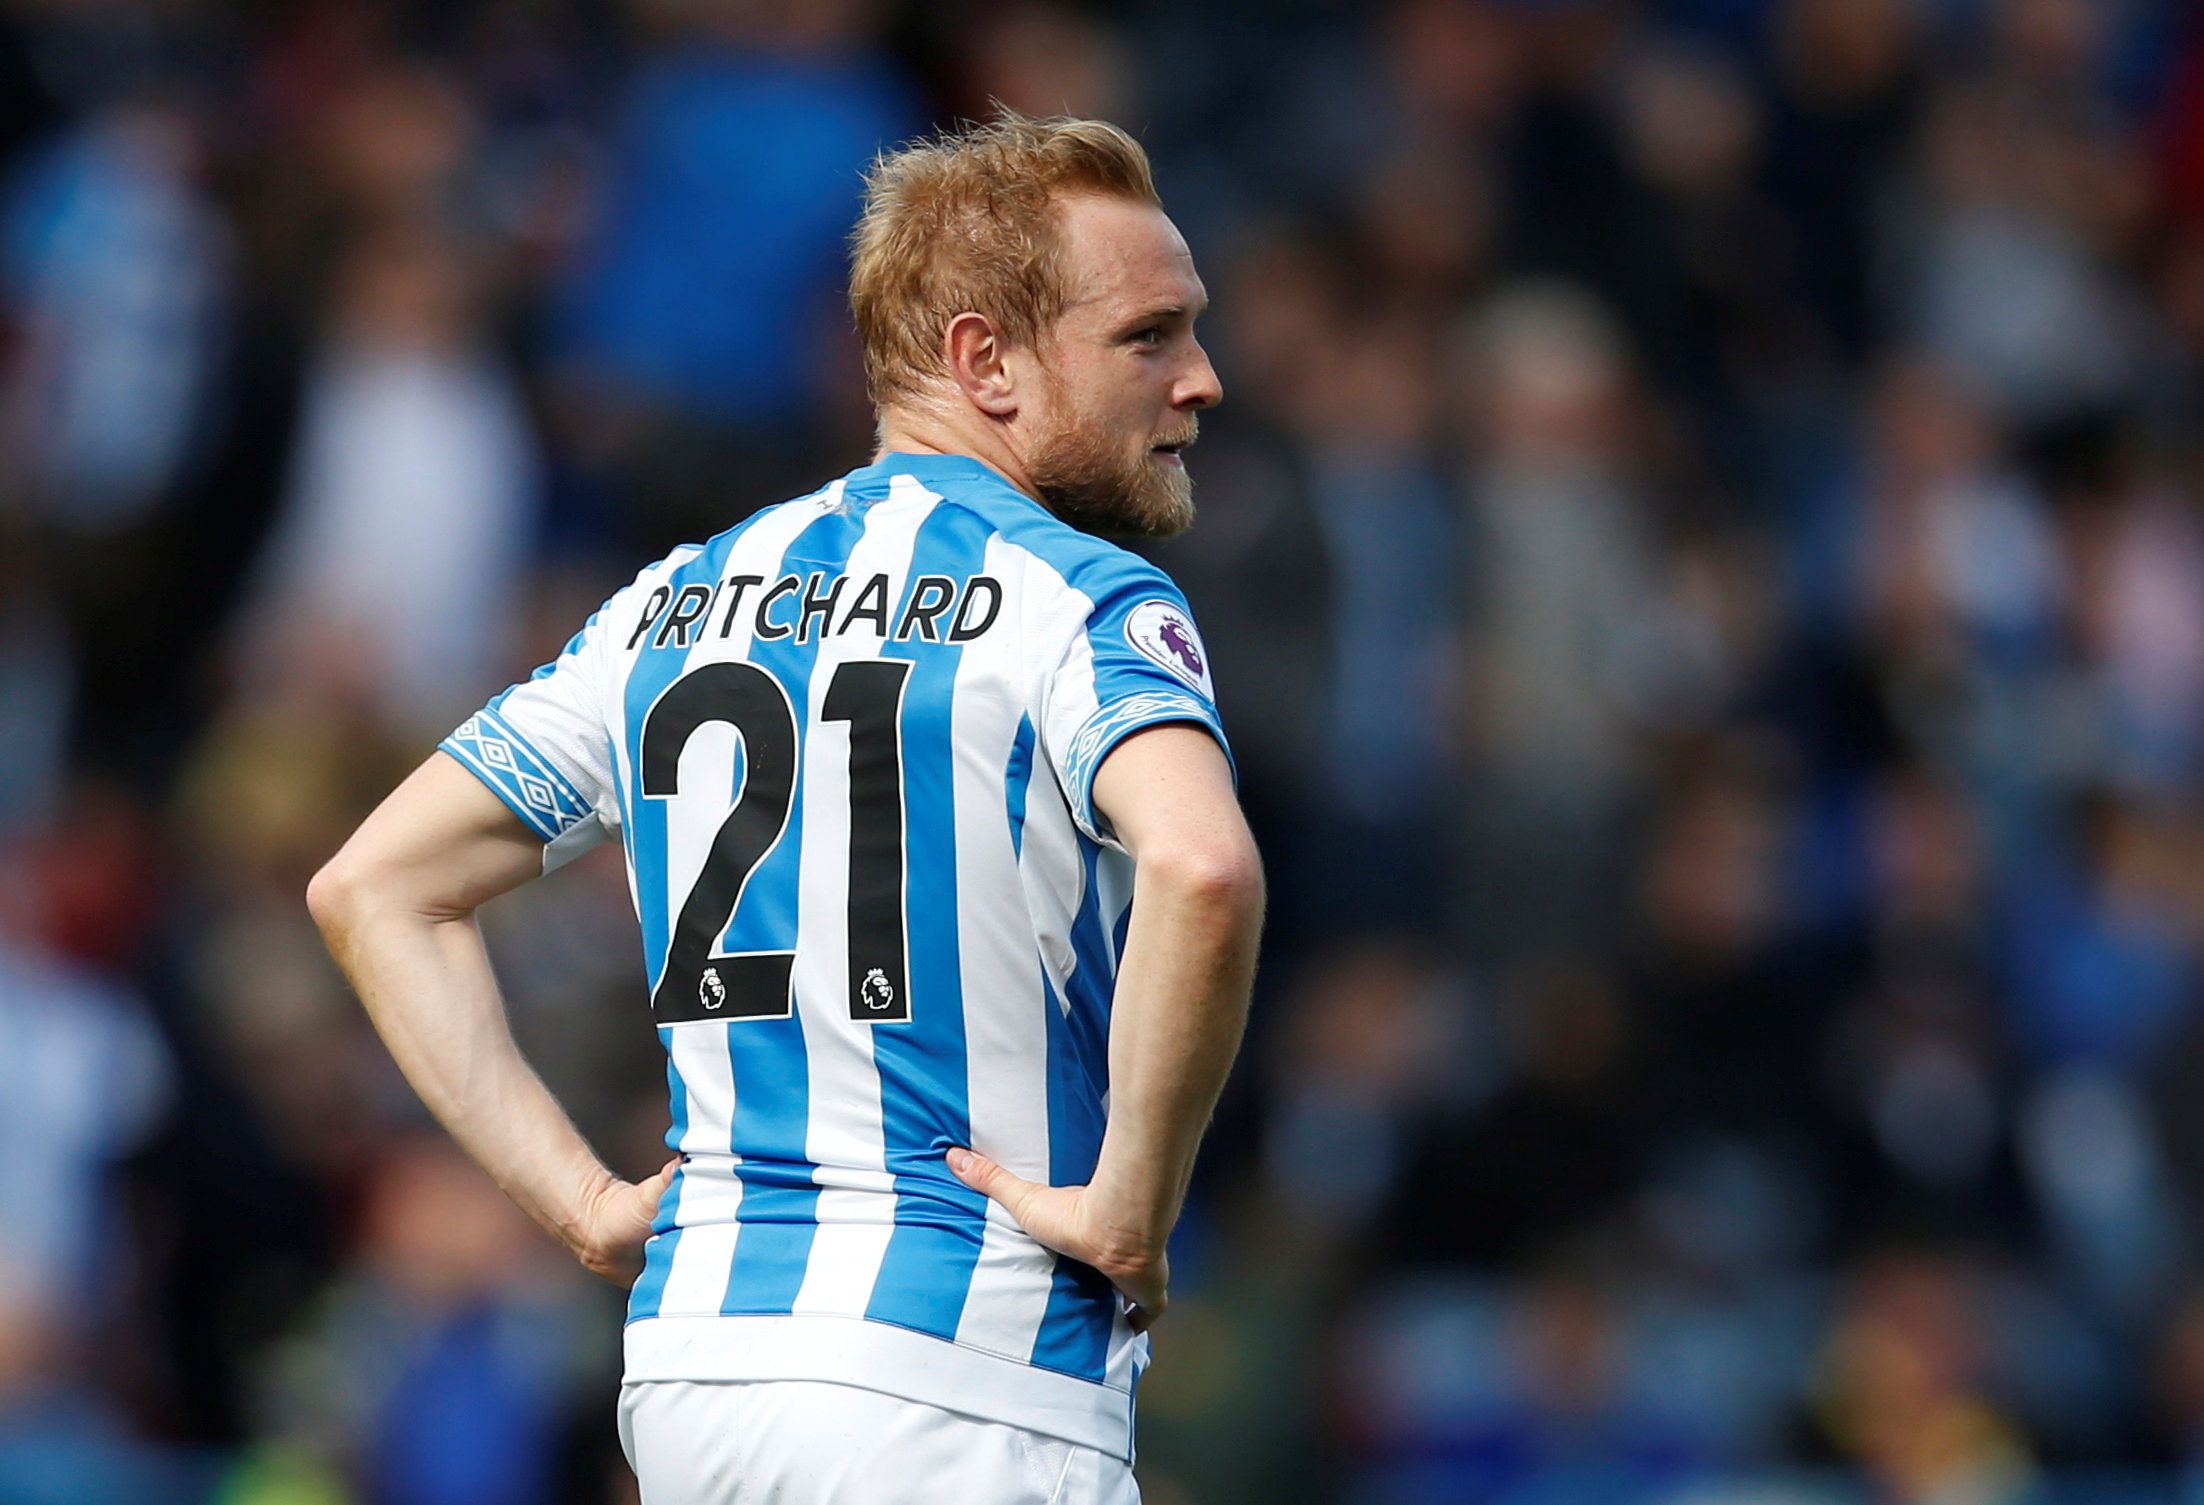 Soccer Football - Premier League - Huddersfield Town v Leicester City - John Smith's Stadium, Huddersfield, Britain - April 6, 2019  Huddersfield Town's Alex Pritchard reacts after the match          Action Images via Reuters/Ed Sykes  EDITORIAL USE ONLY. No use with unauthorized audio, video, data, fixture lists, club/league logos or 